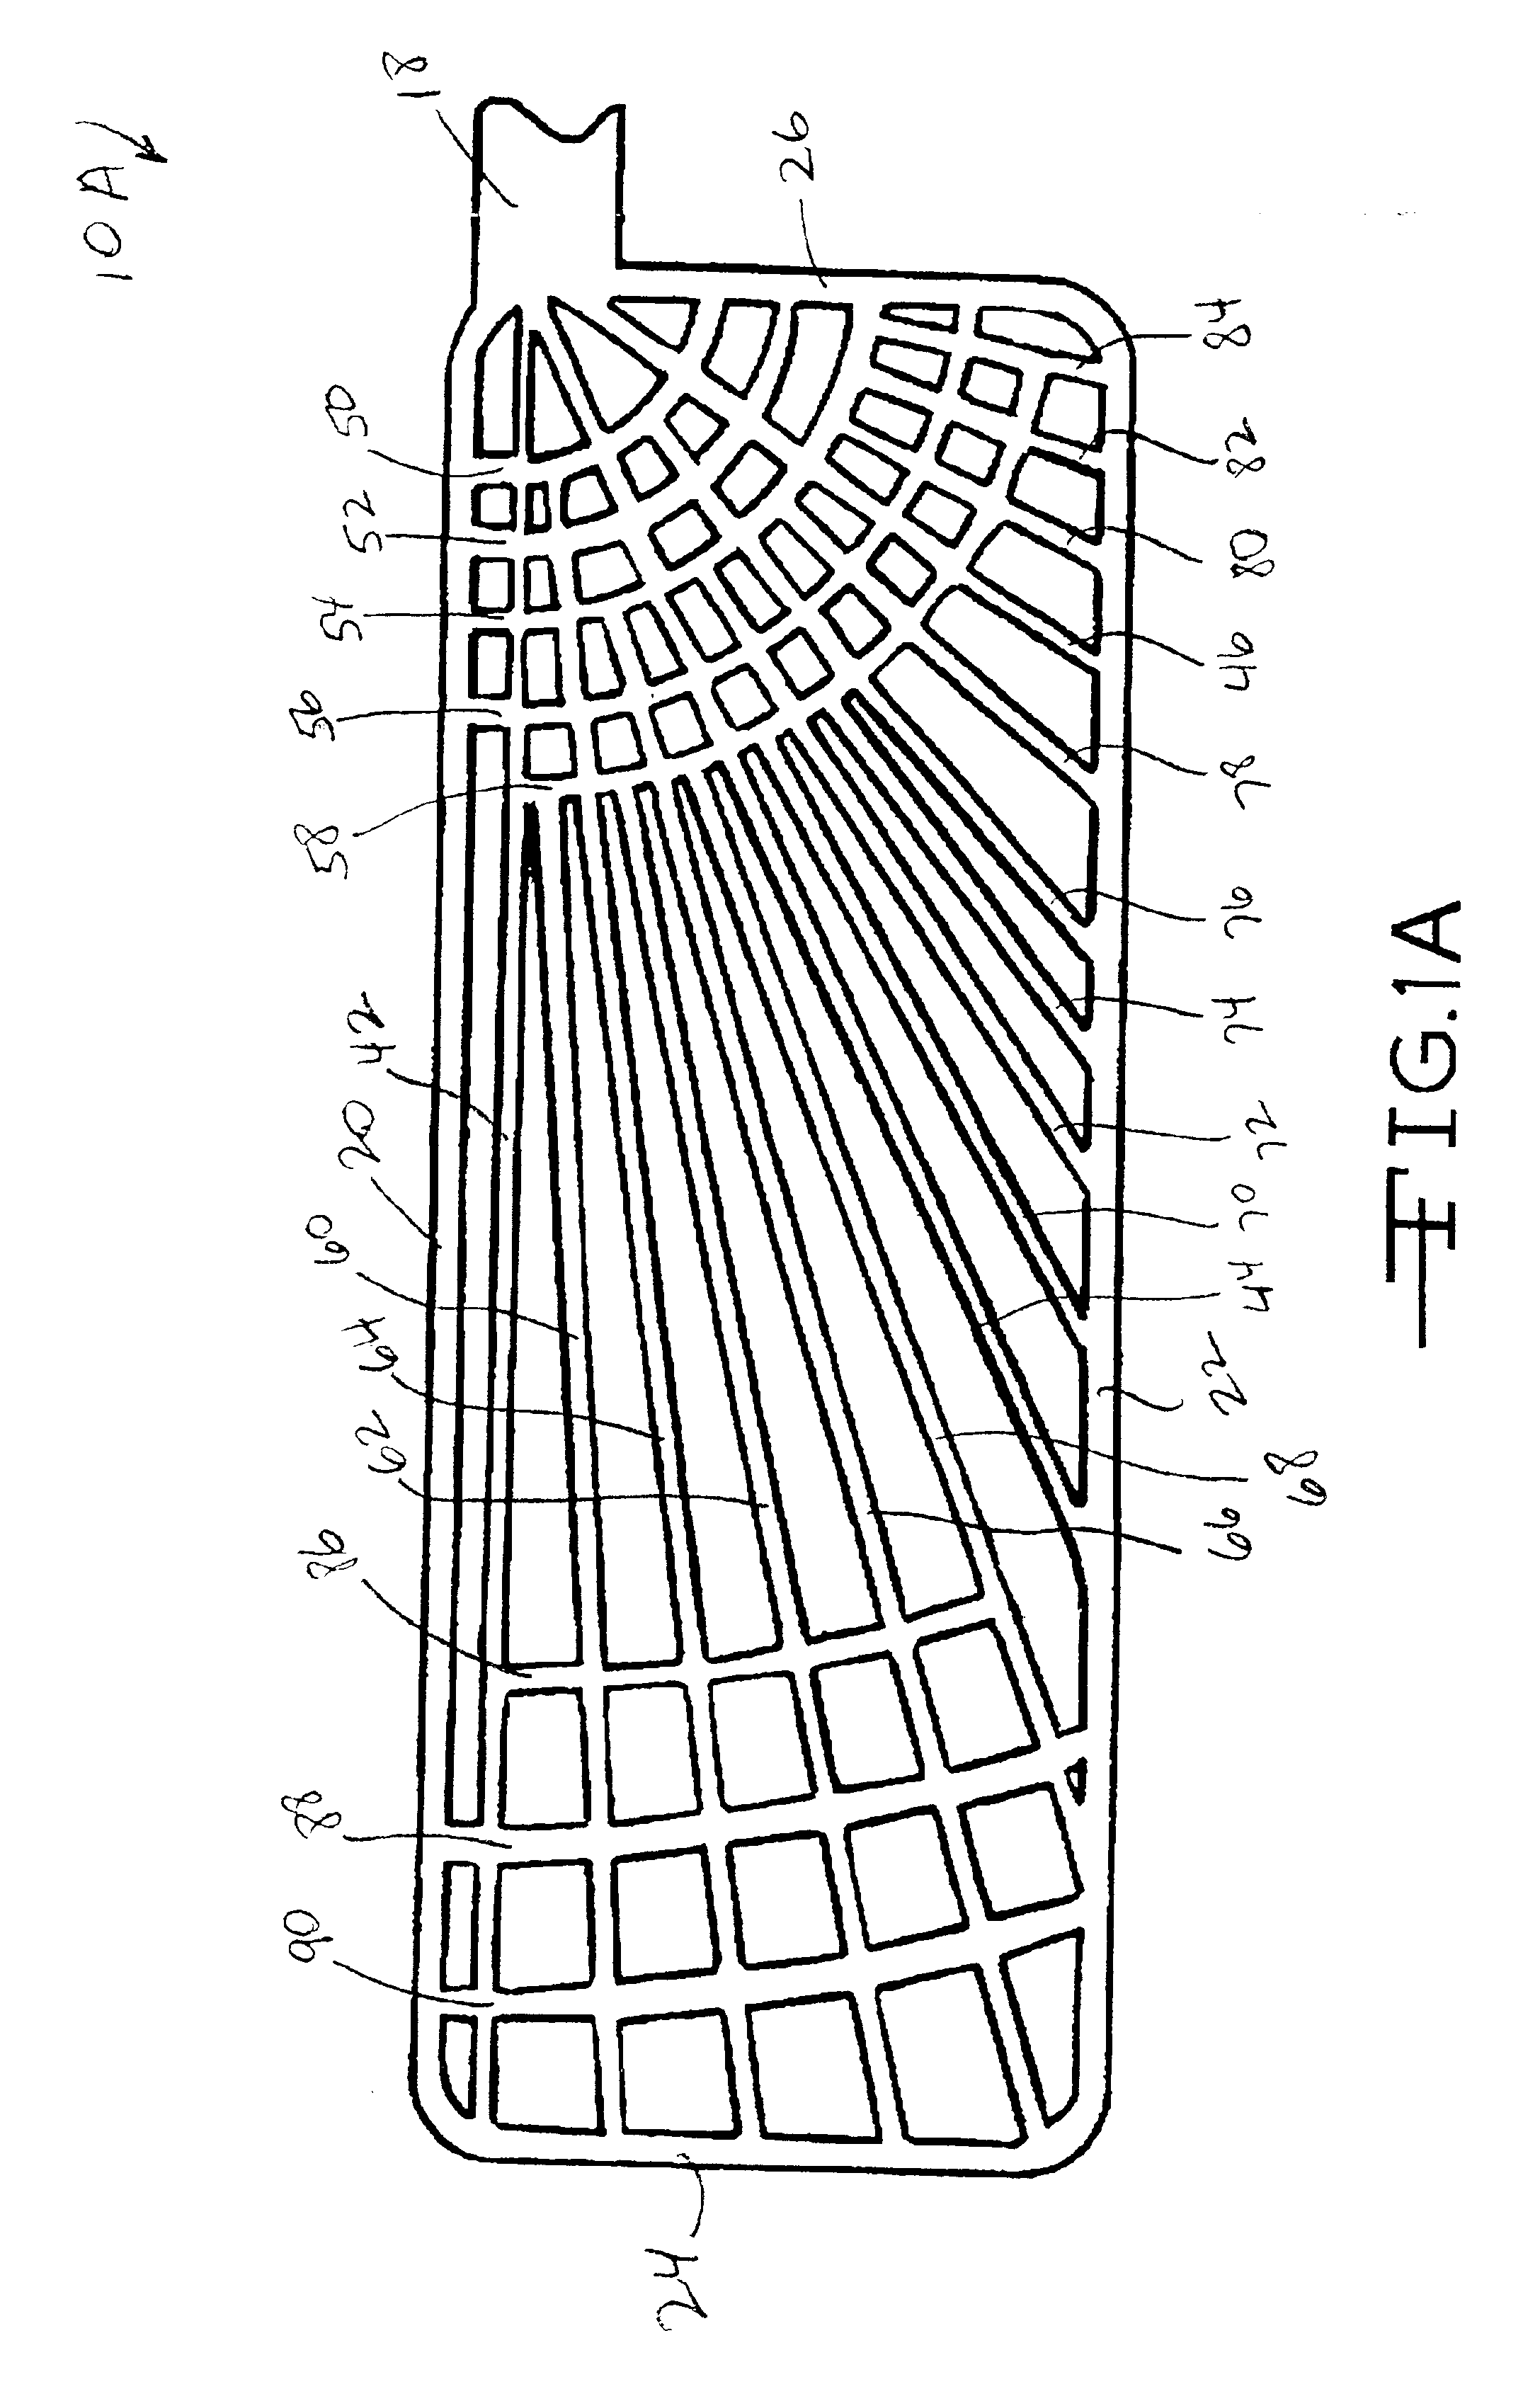 Current collector having non-symmetric grid pattern converging at a common focal point